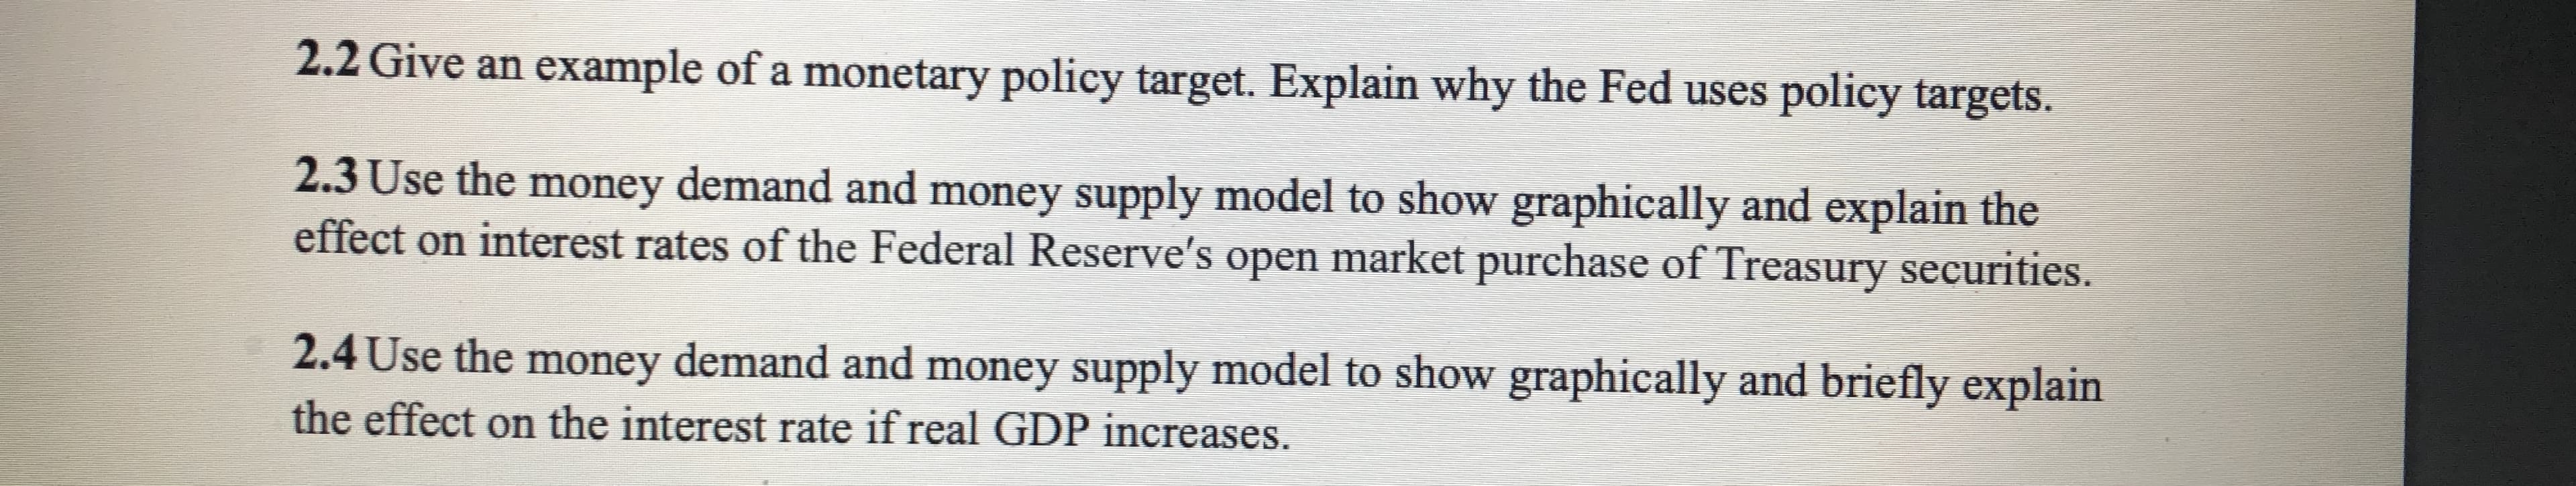 2.2 Give an example of a monetary policy target. Explain why the Fed uses policy targets.
2.3 Use the money demand and money supply model to show graphically and explain the
effect on interest rates of the Federal Reserve's open market purchase of Treasury securities.
2.4 Use the money demand and money supply model to show graphically and briefly explain
the effect on the interest rate if real GDP increases.
